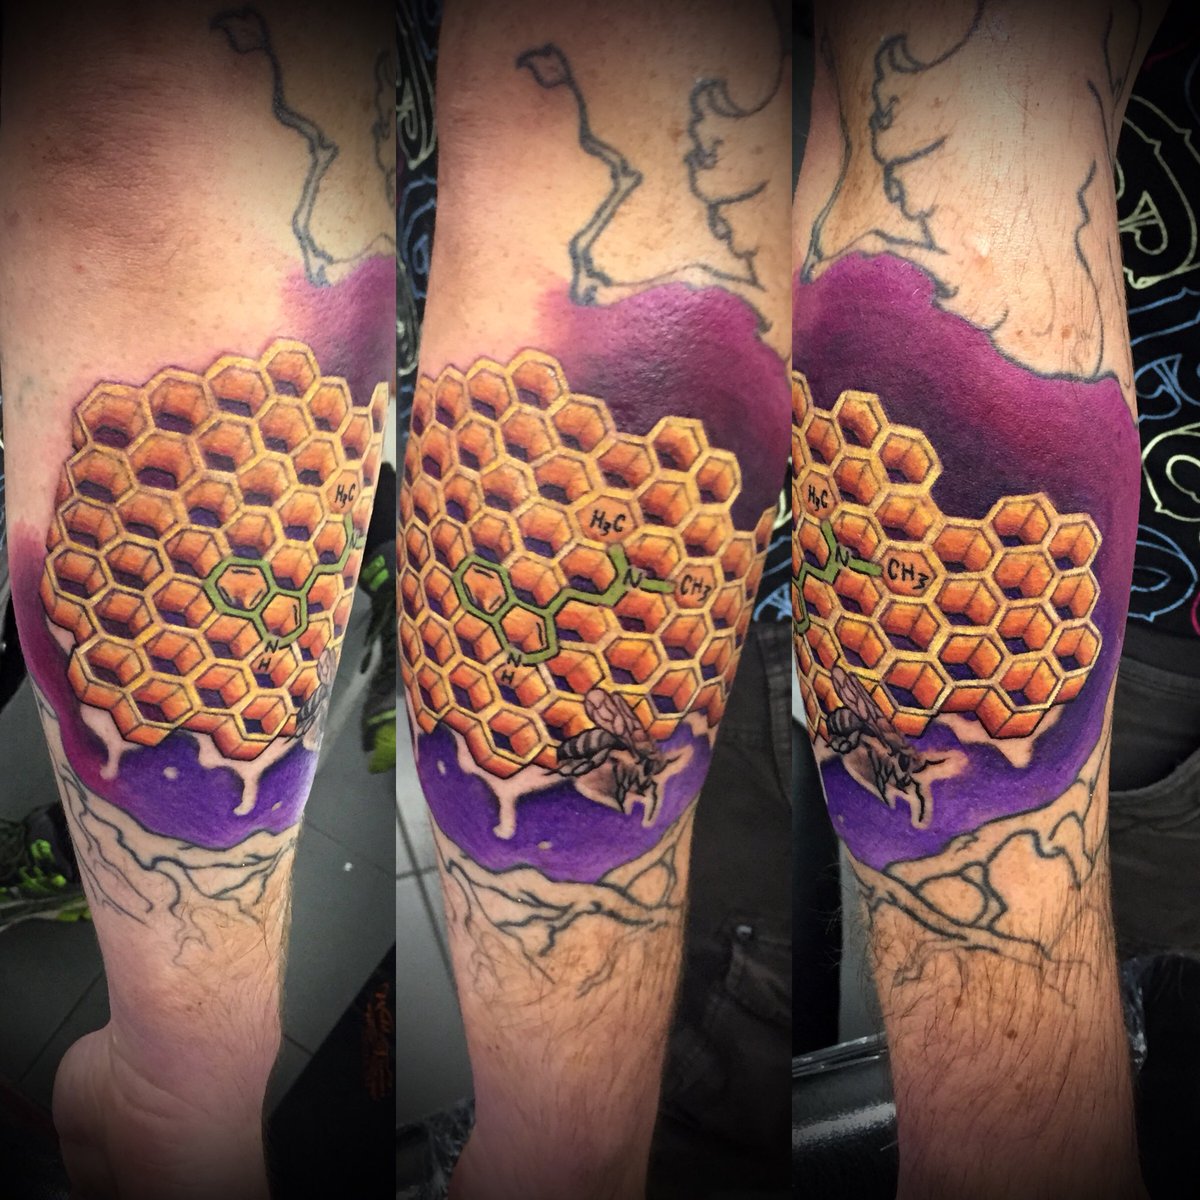 Some #honeycomb goodness done last week. 